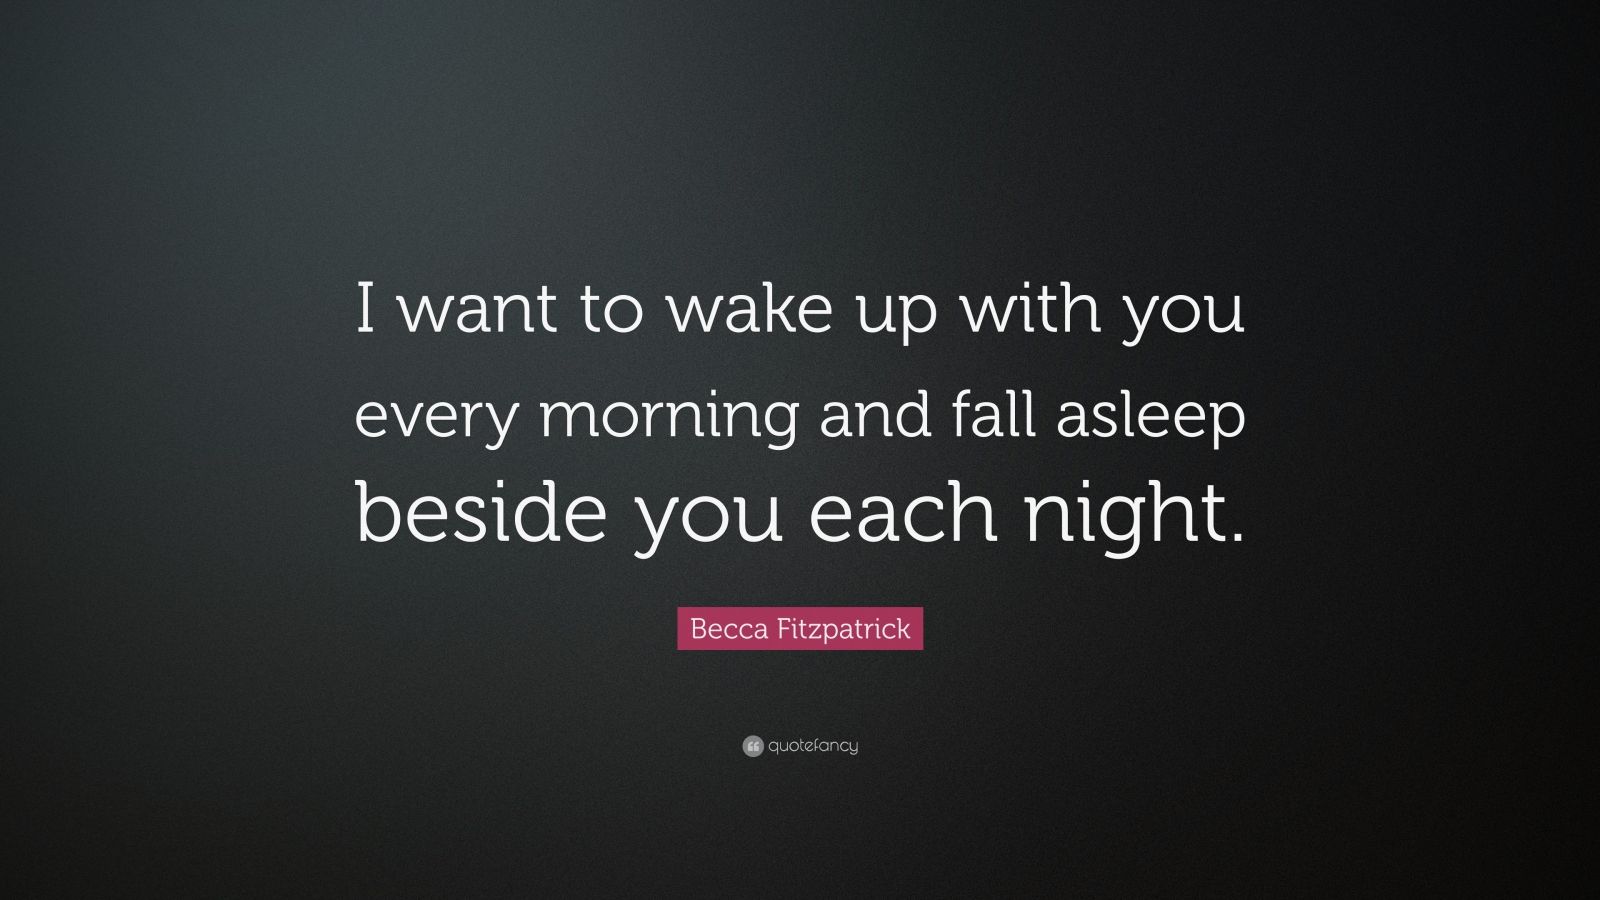 Becca Fitzpatrick Quote: “I want to wake up with you every morning and ...